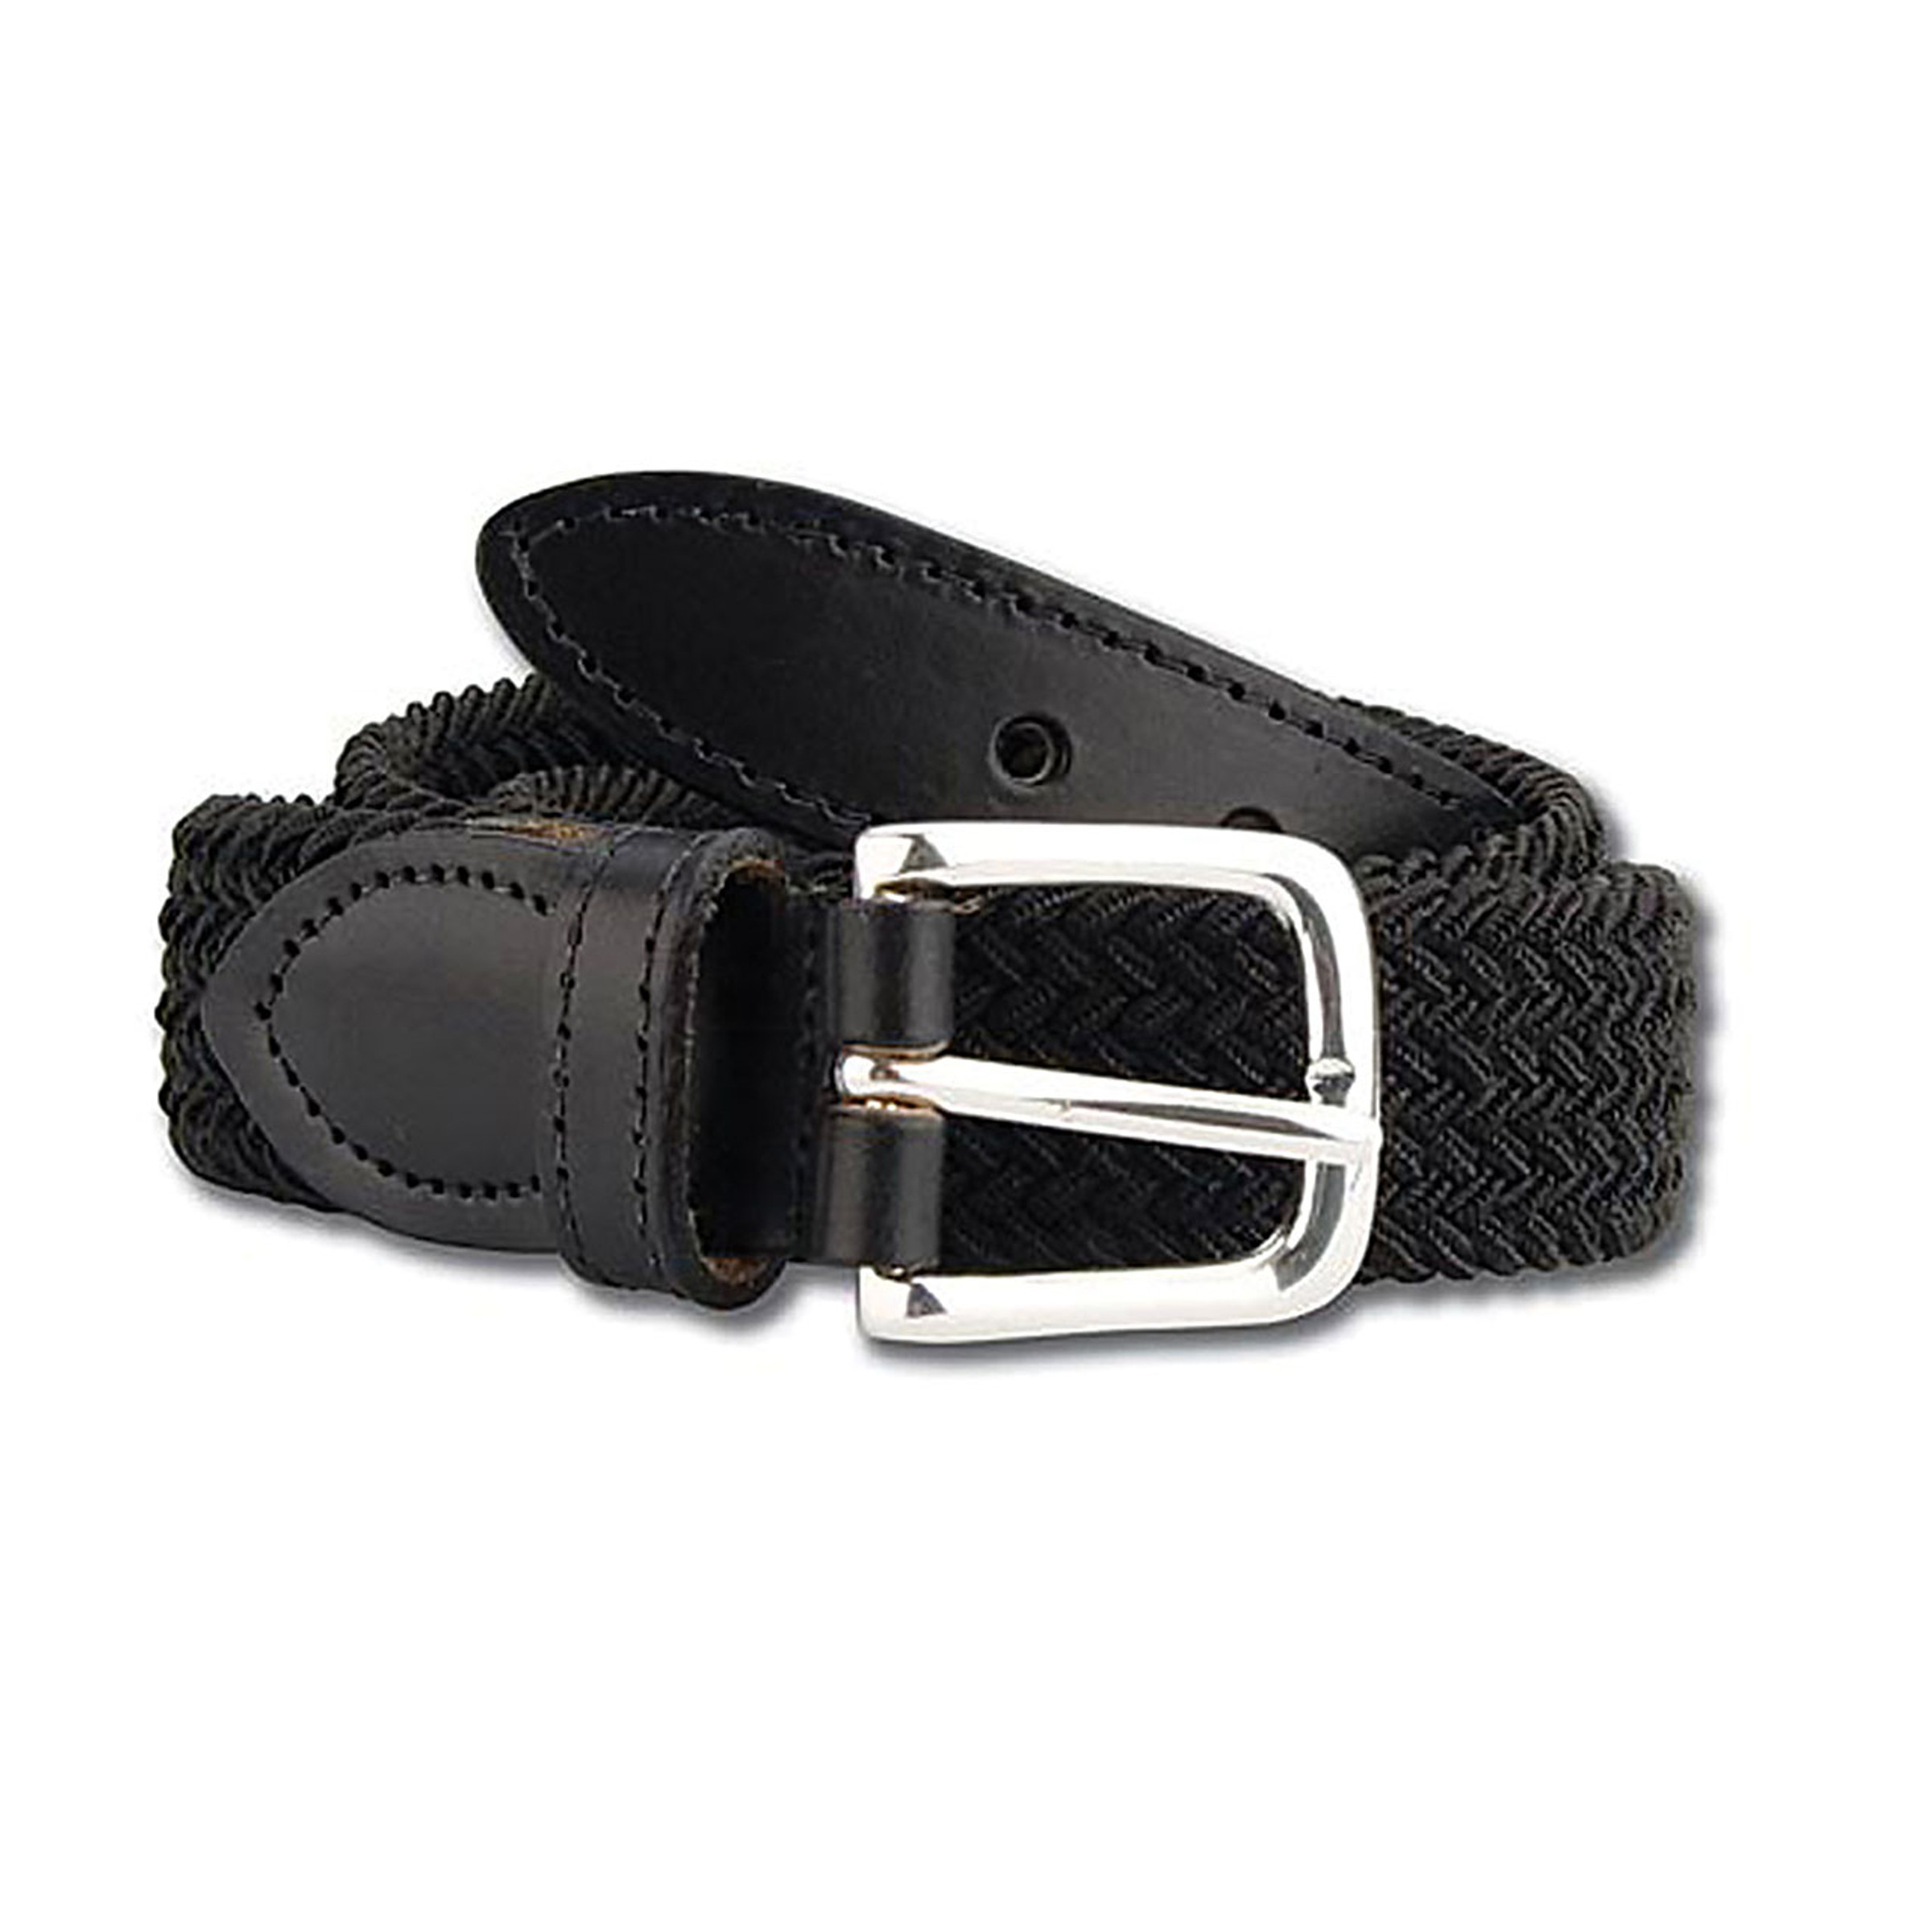 Men's Leather Tab Solid Color Braided Belt at Sportif | Sportif USA